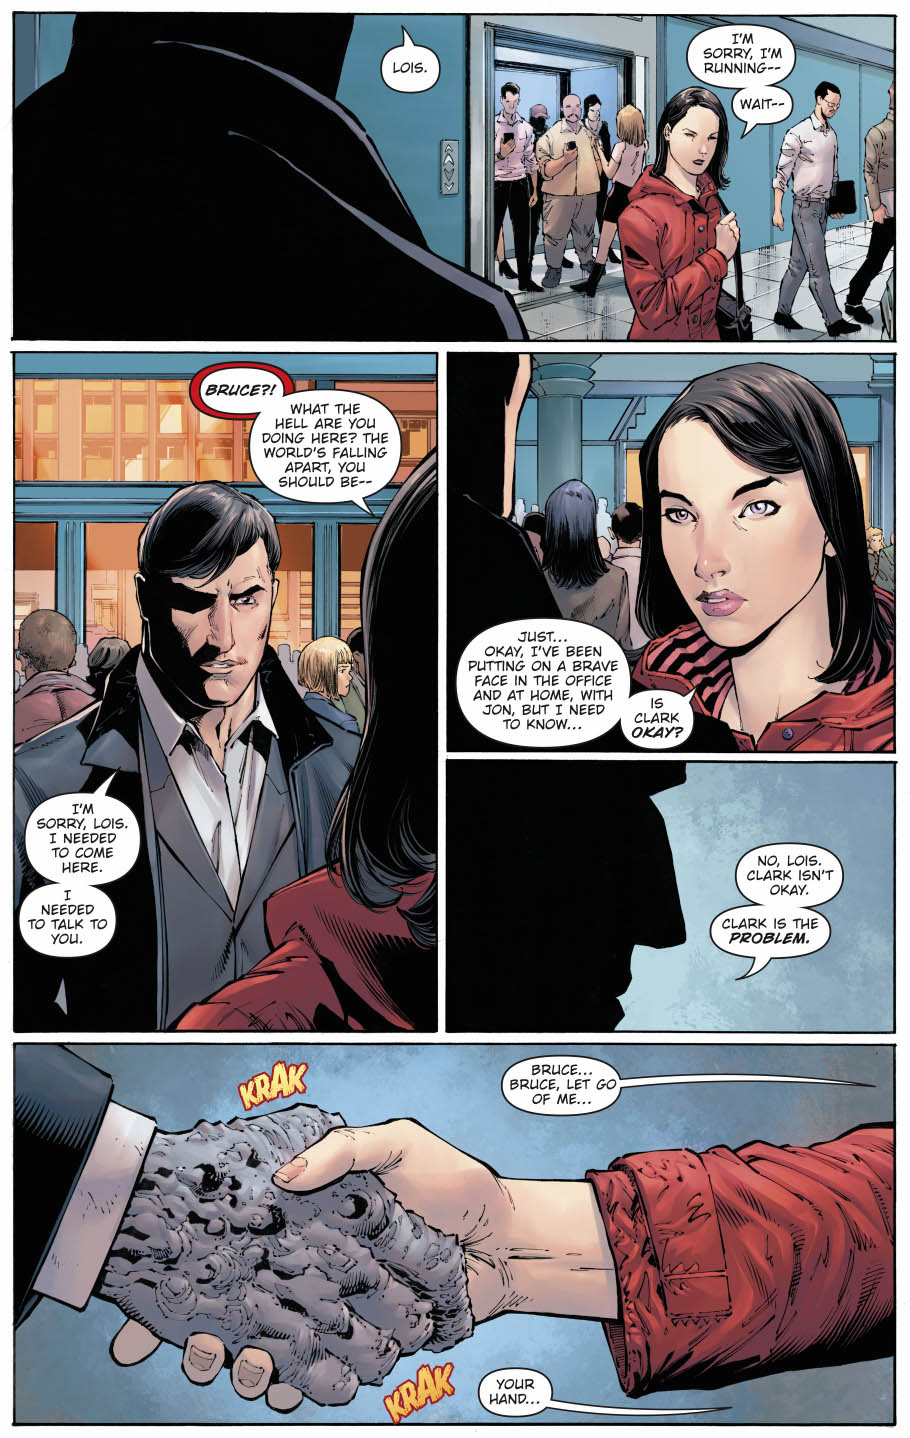 The Devastator Infects Lois Lane With The Doomsday Virus 